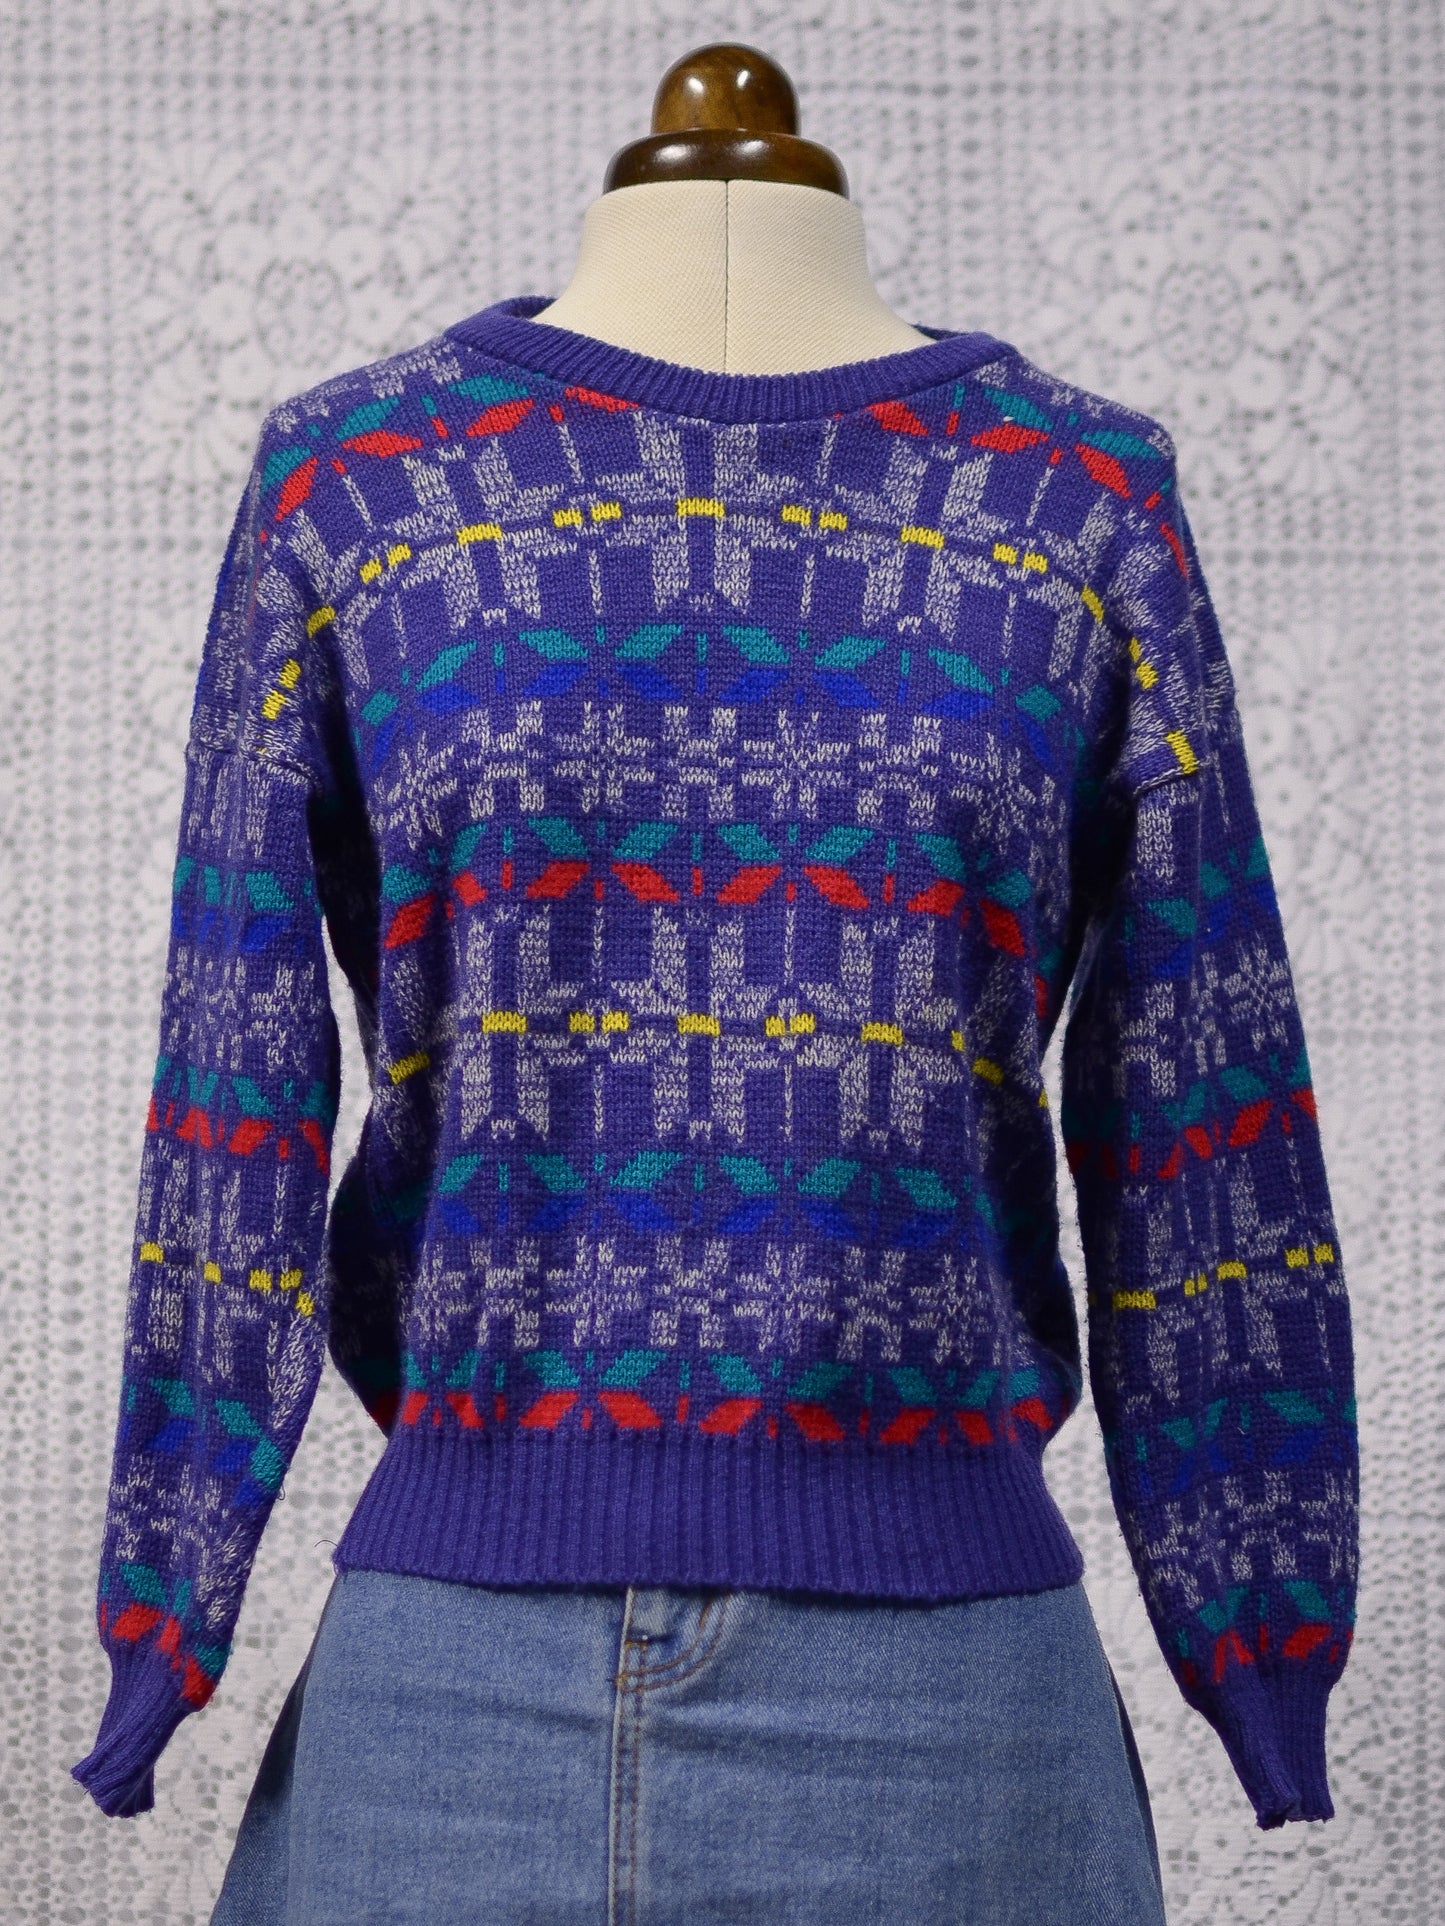 1990s blue, yellow and red snowflake pattern nordic jumper kids or small ladies